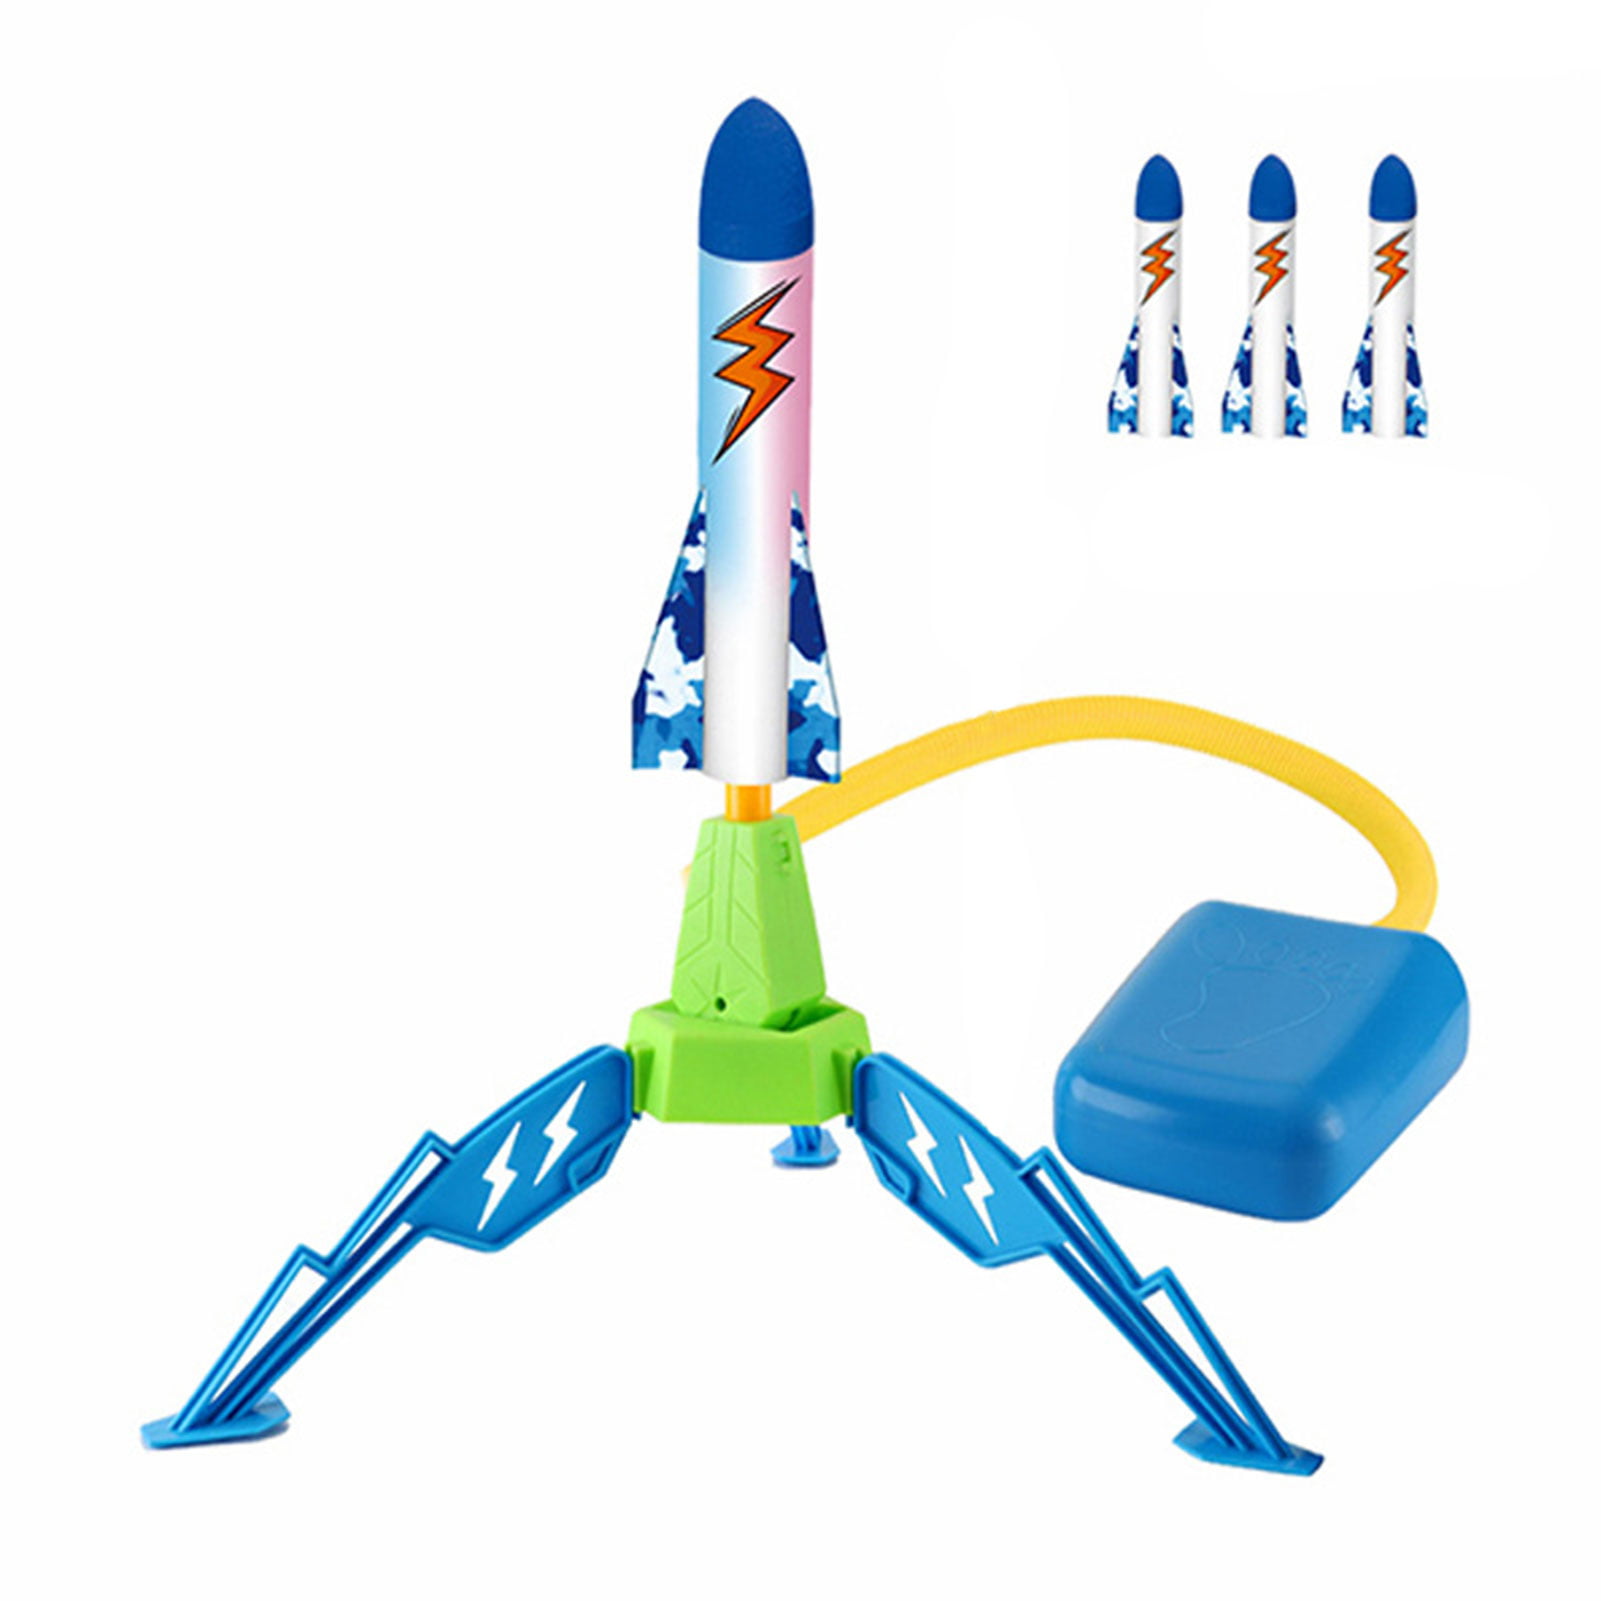 Details about    Jump Rocket Launchers for Kids Outdoor Toys with 6 Colorful Foam Rockets Fun 